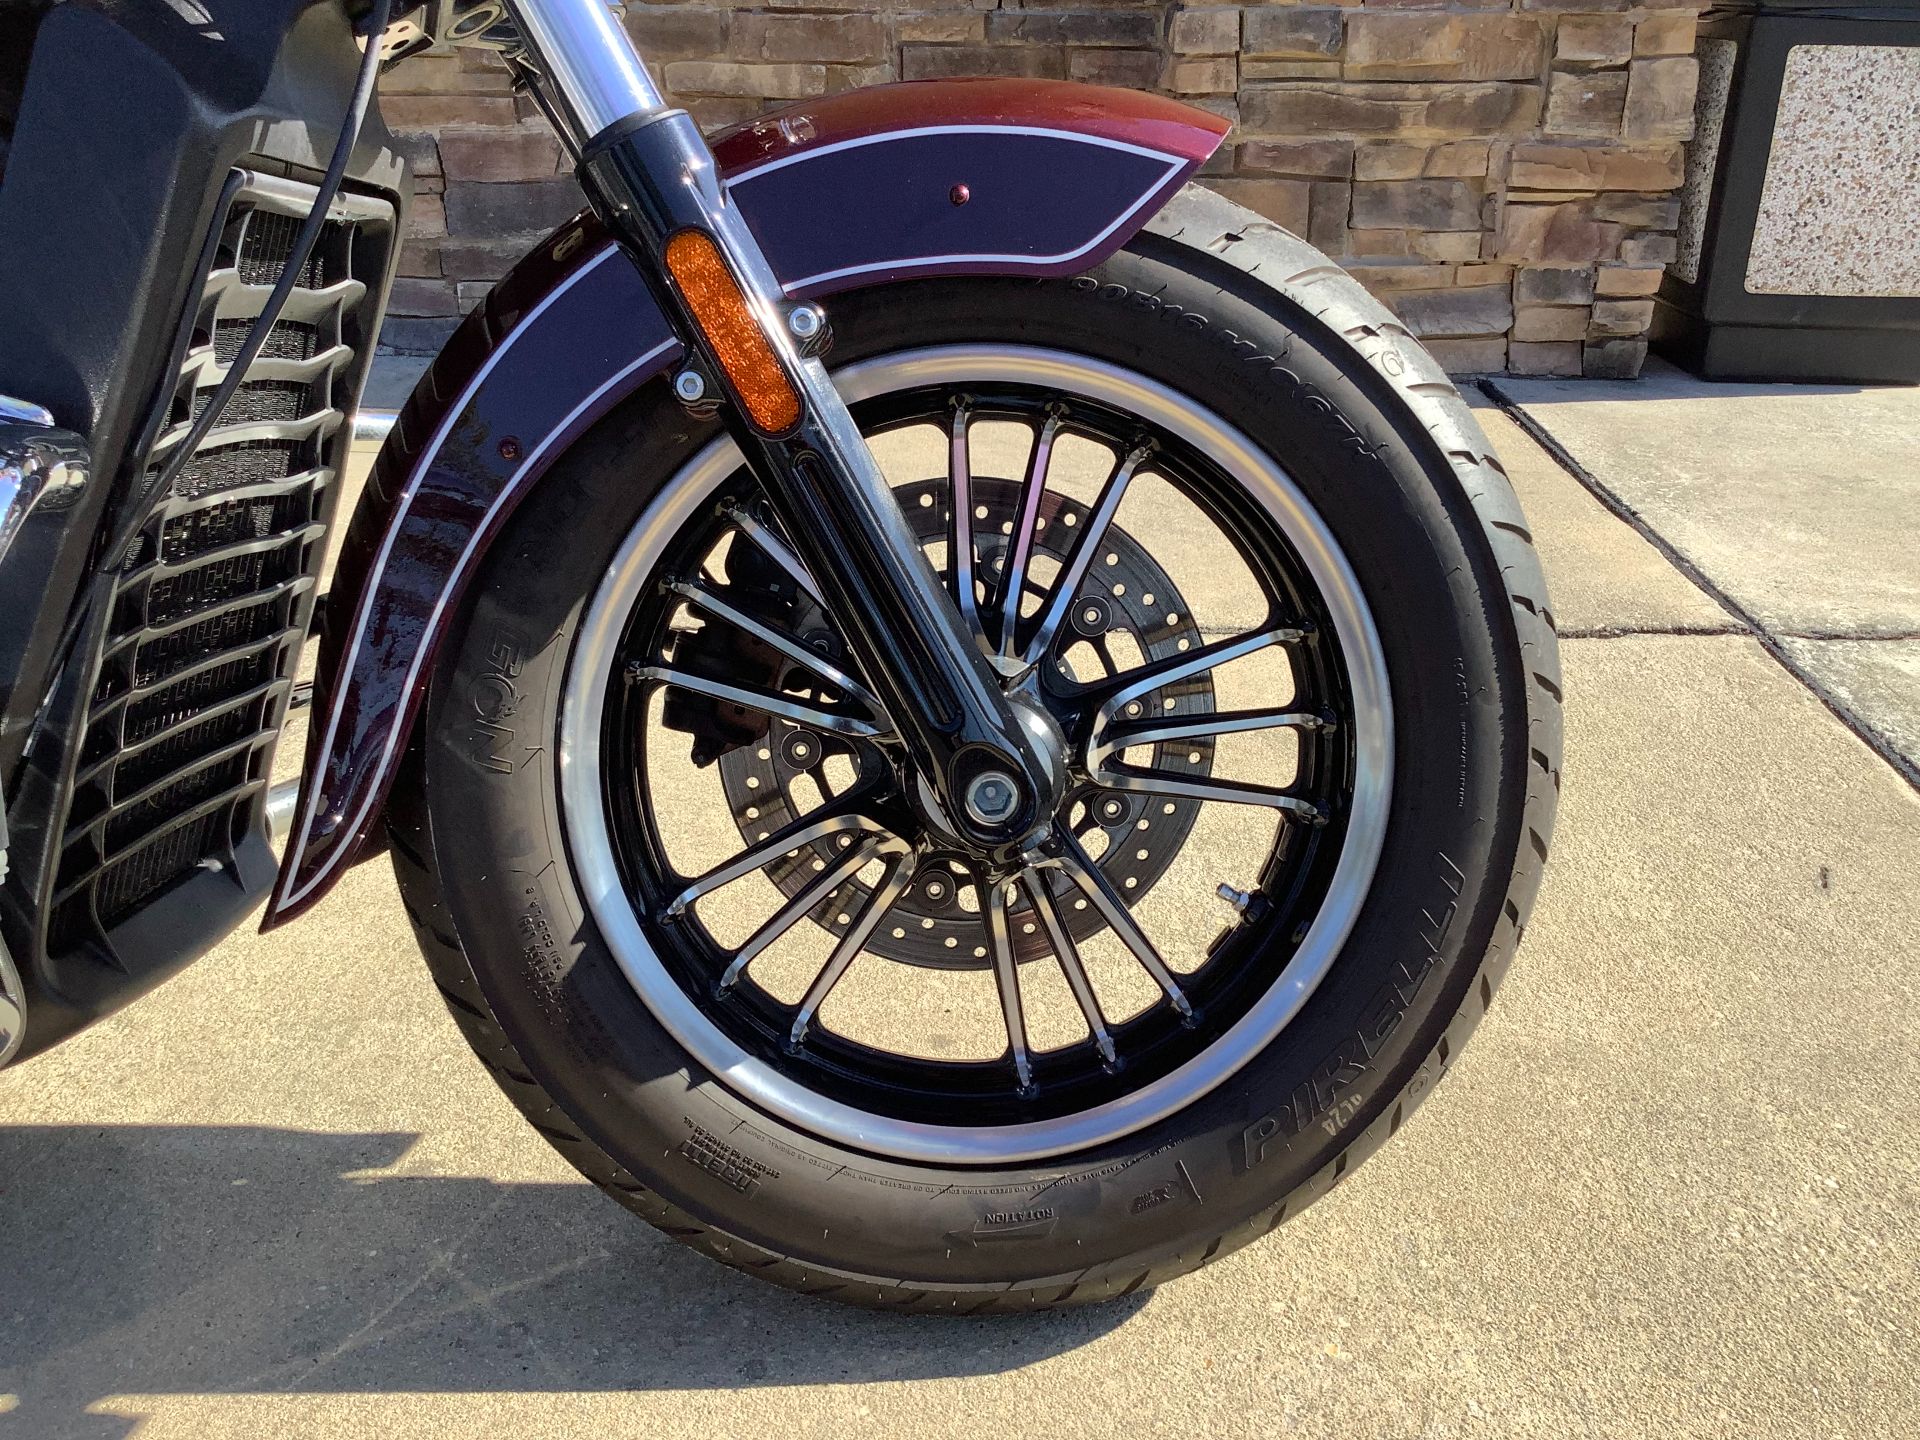 2021 Indian Motorcycle SCOUT ABS TWO TONE in Panama City Beach, Florida - Photo 6